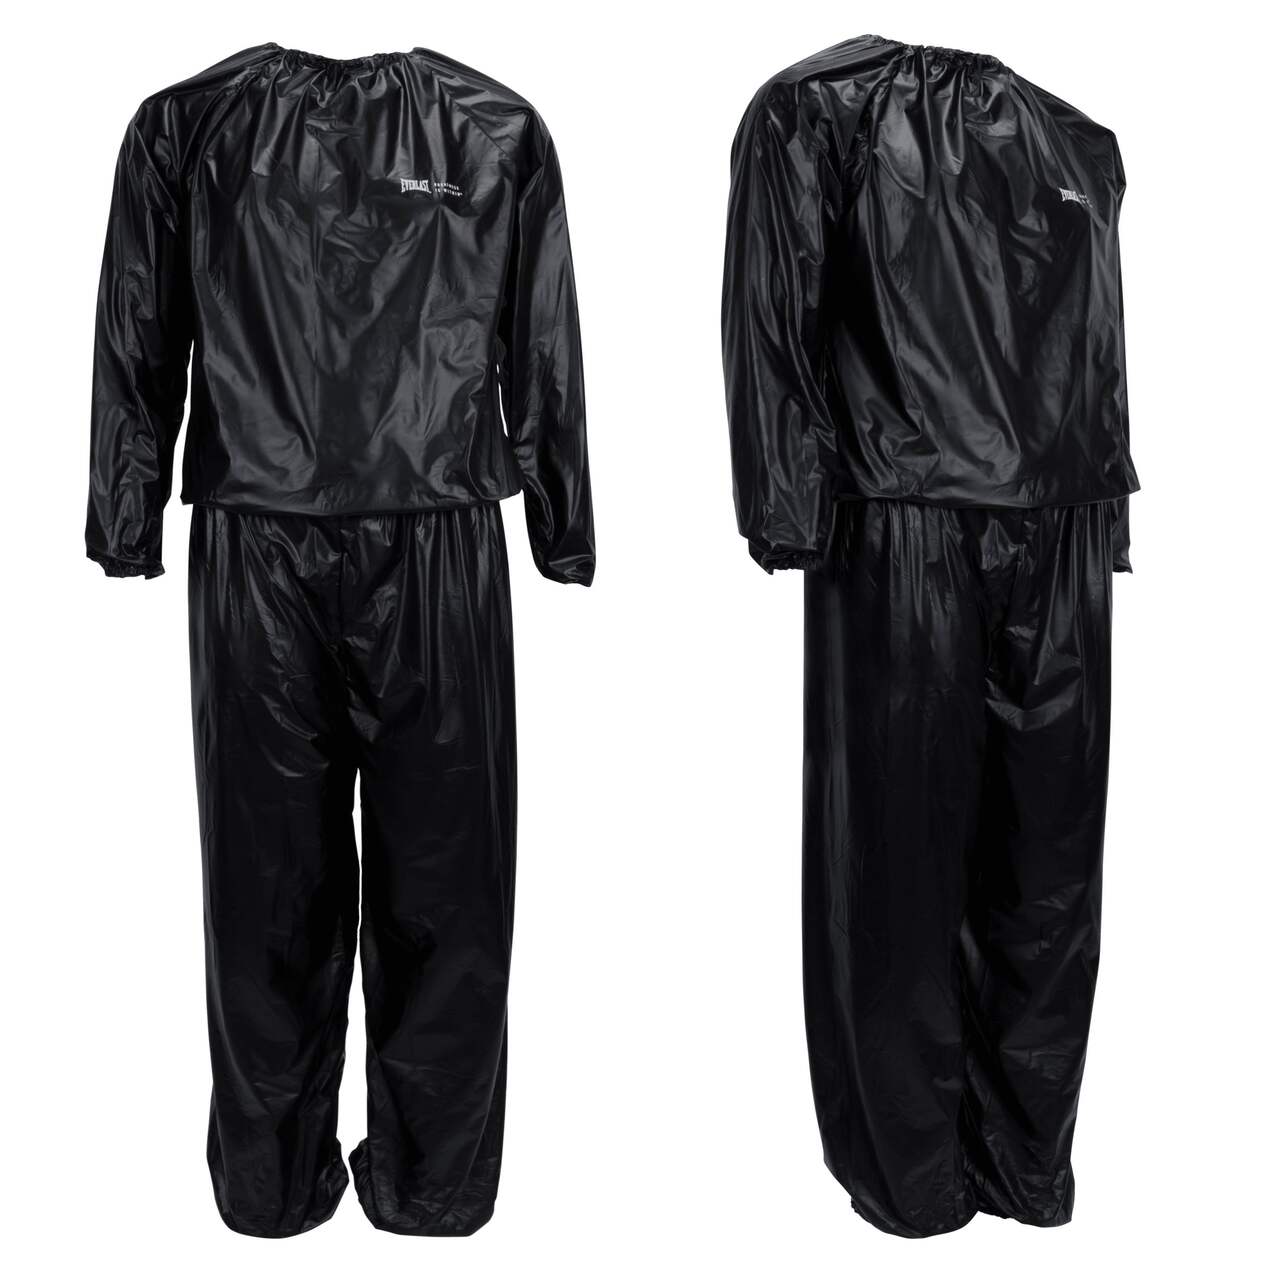 https://media-www.canadiantire.ca/product/playing/exercise/exercise-accessories/1841244/everlast-pvc-sauna-suit-black-medium-large-c8717823-8146-4614-a96c-8e8765e8acdb-jpgrendition.jpg?imdensity=1&imwidth=1244&impolicy=mZoom